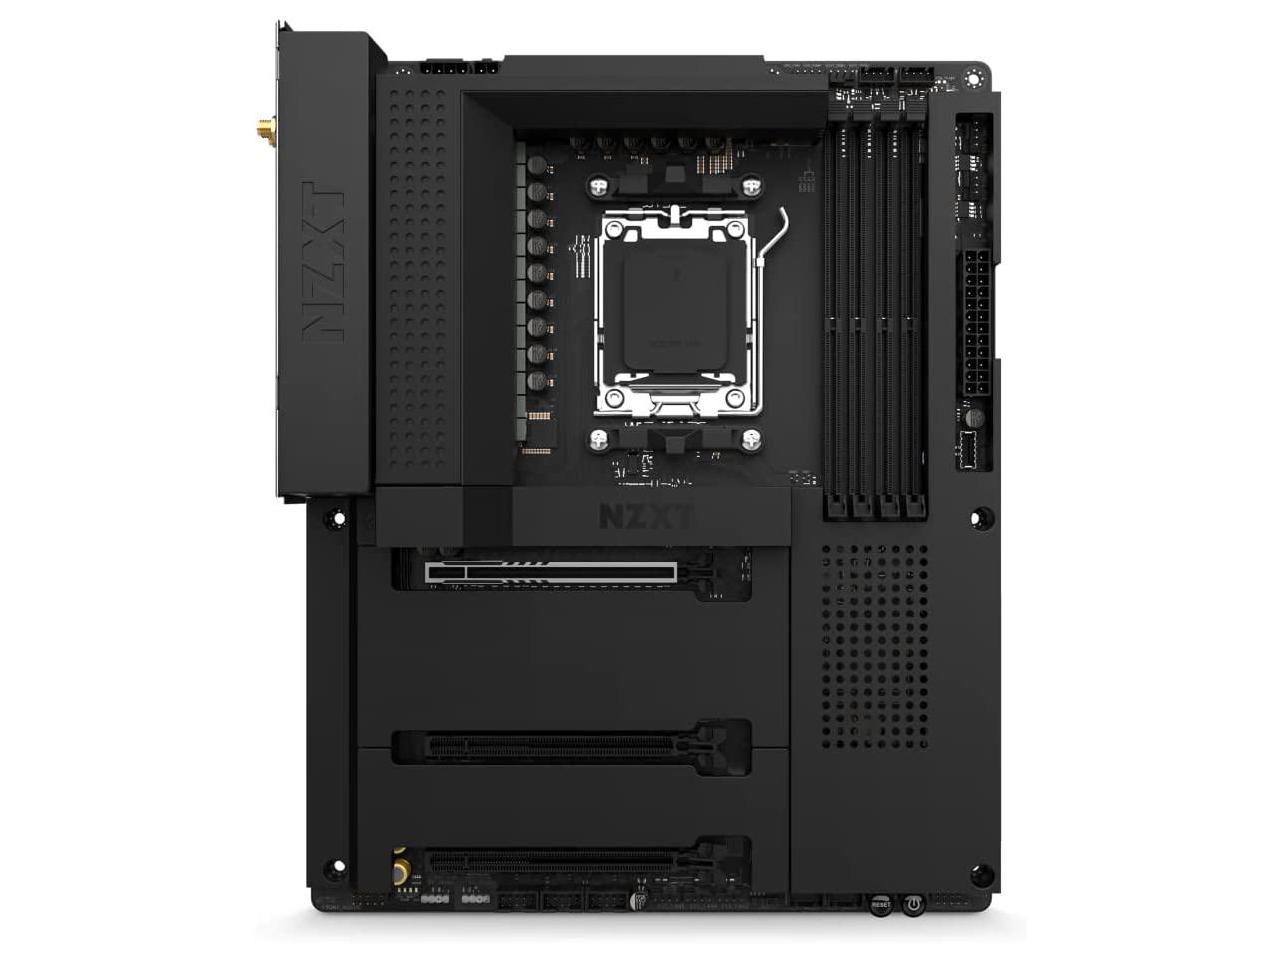 NZXT N7 B650 - N7-B65XT-B1 - AMD B650 chipset (Supports AMD 7000 Series CPUs) - ATX Gaming Motherboard - Integrated Rear I/O Shield - WiFi 6 connectivity - Black - image 1 of 16